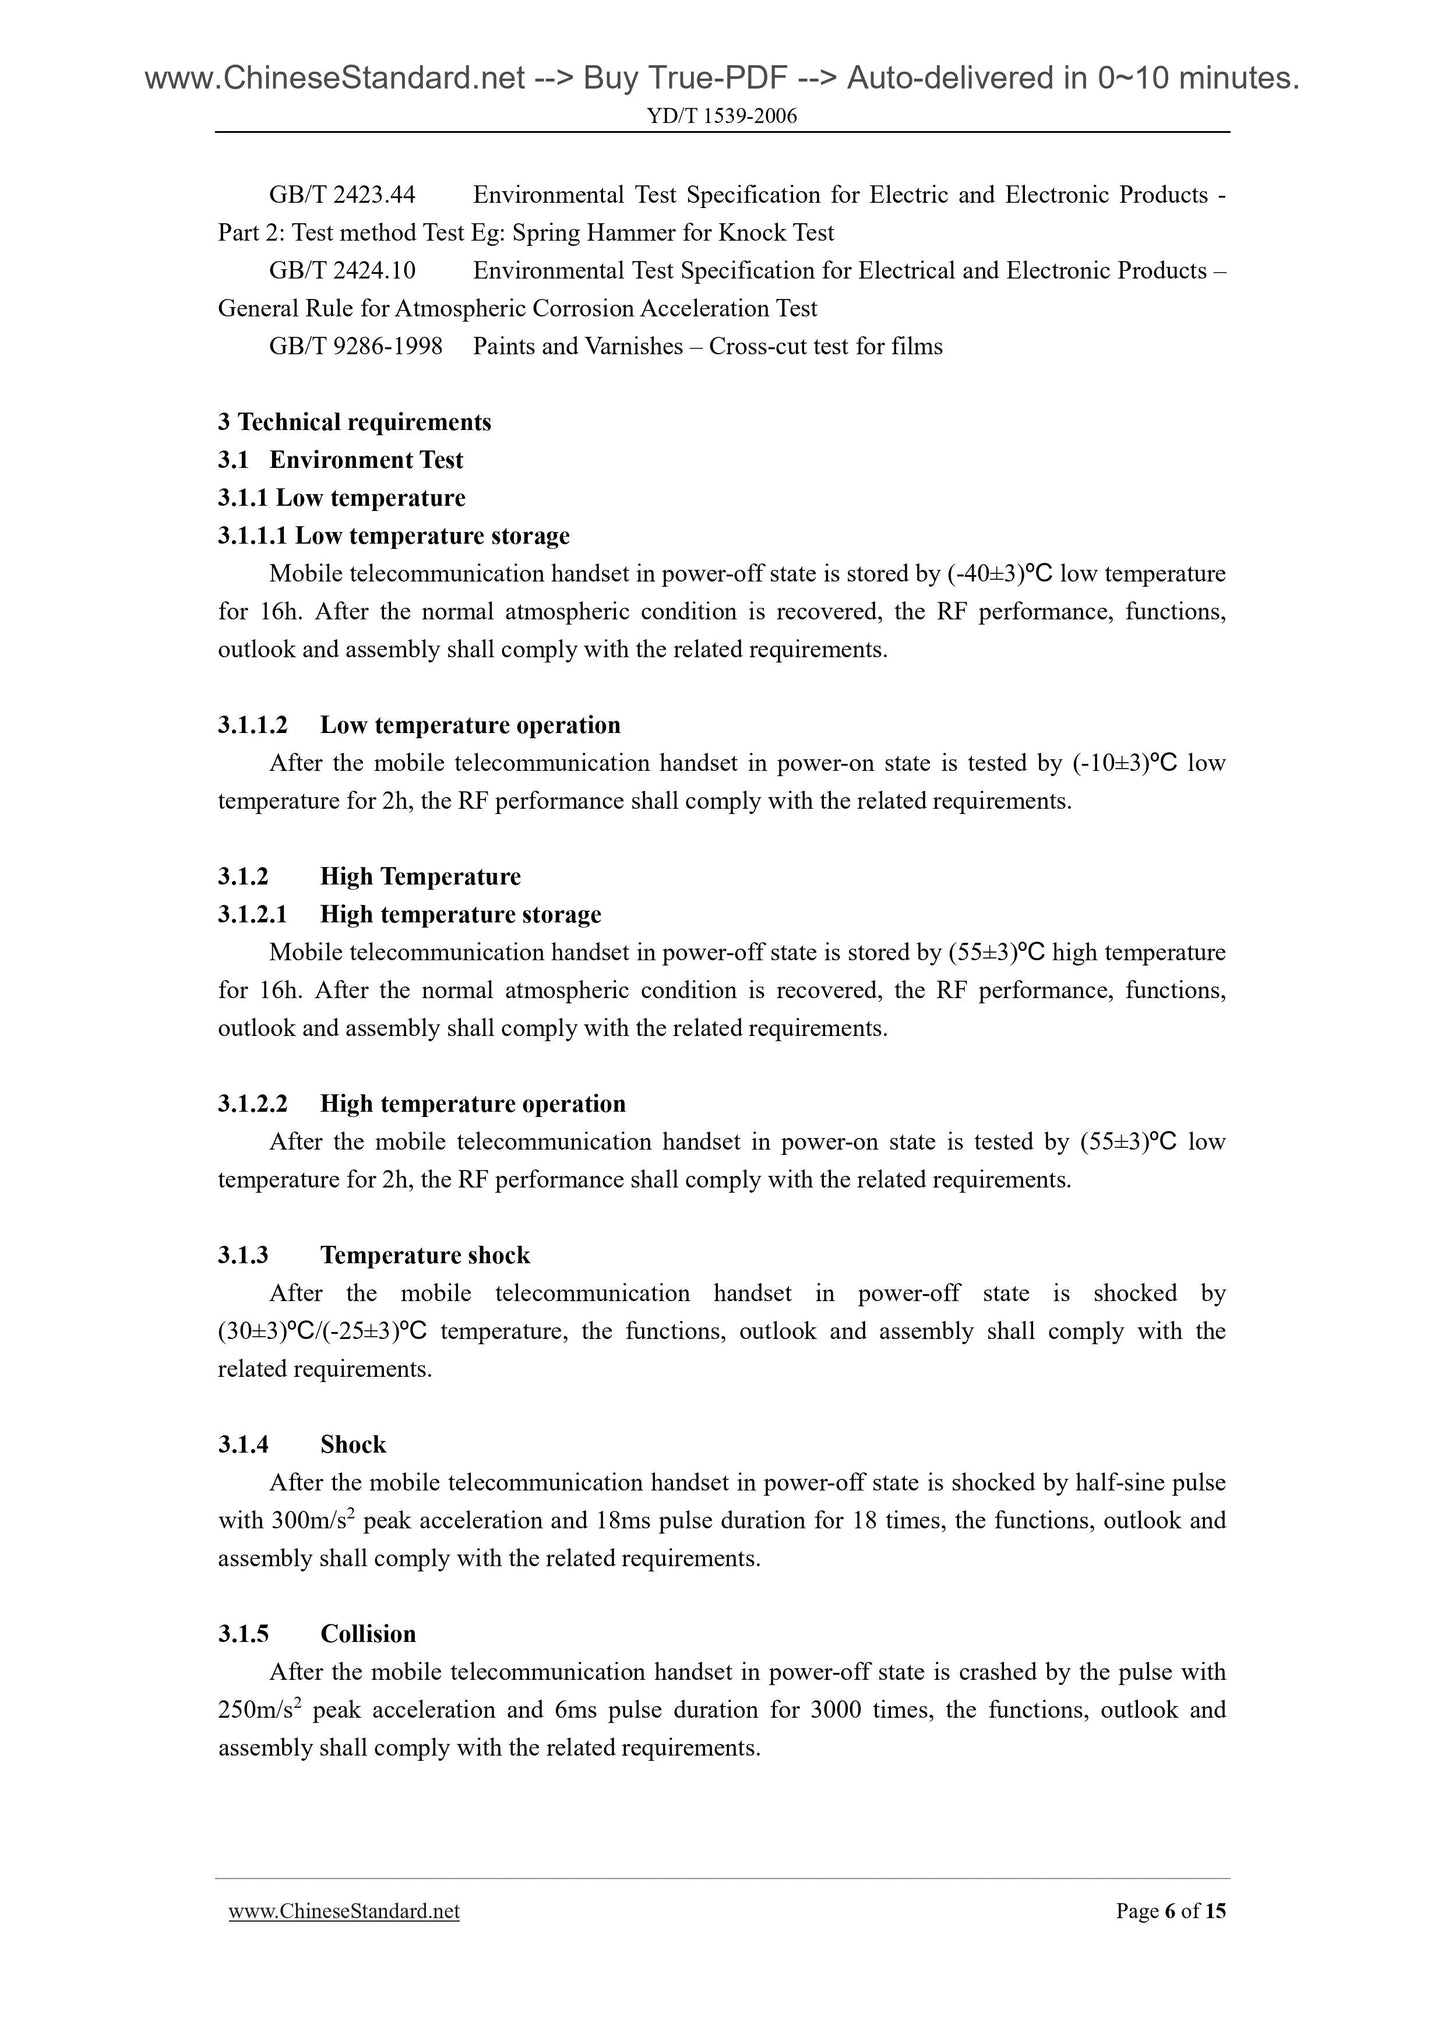 YD/T 1539-2006 Page 6